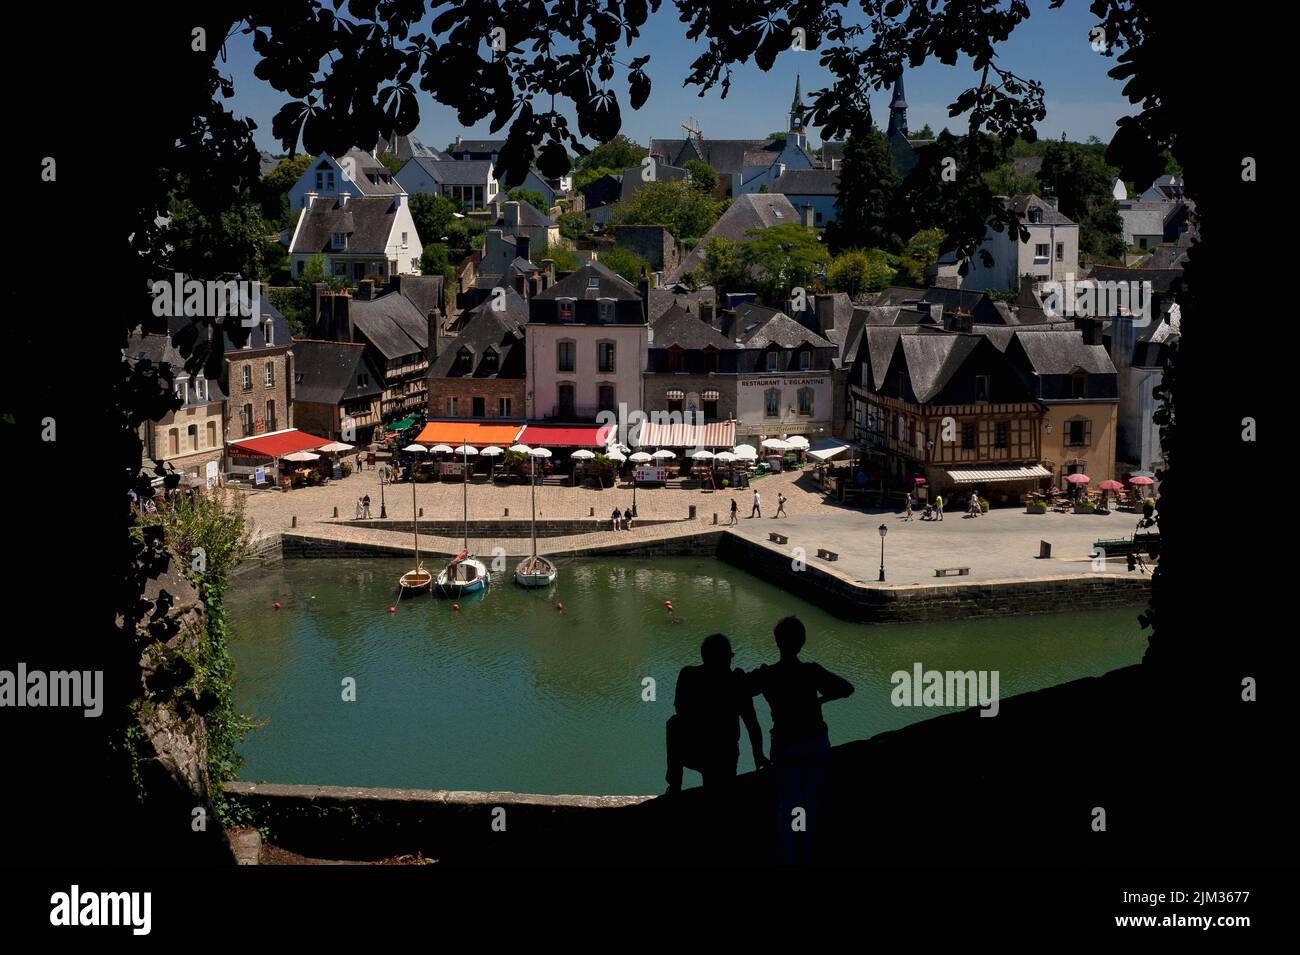 A couple silhouetted against the green River Loch stand looking down on the Place Saint-Sauveur in the Saint-Goustan district of Auray, Morbihan, southern Brittany, France, lined with restaurants and pavement cafes with colourful awnings and sun umbrellas.  Saint-Goustan, once a busy fishing and commercial port, is now a popular tourist destination that honours a 1776 visit by US Founding Father, Benjamin Franklin. Stock Photo